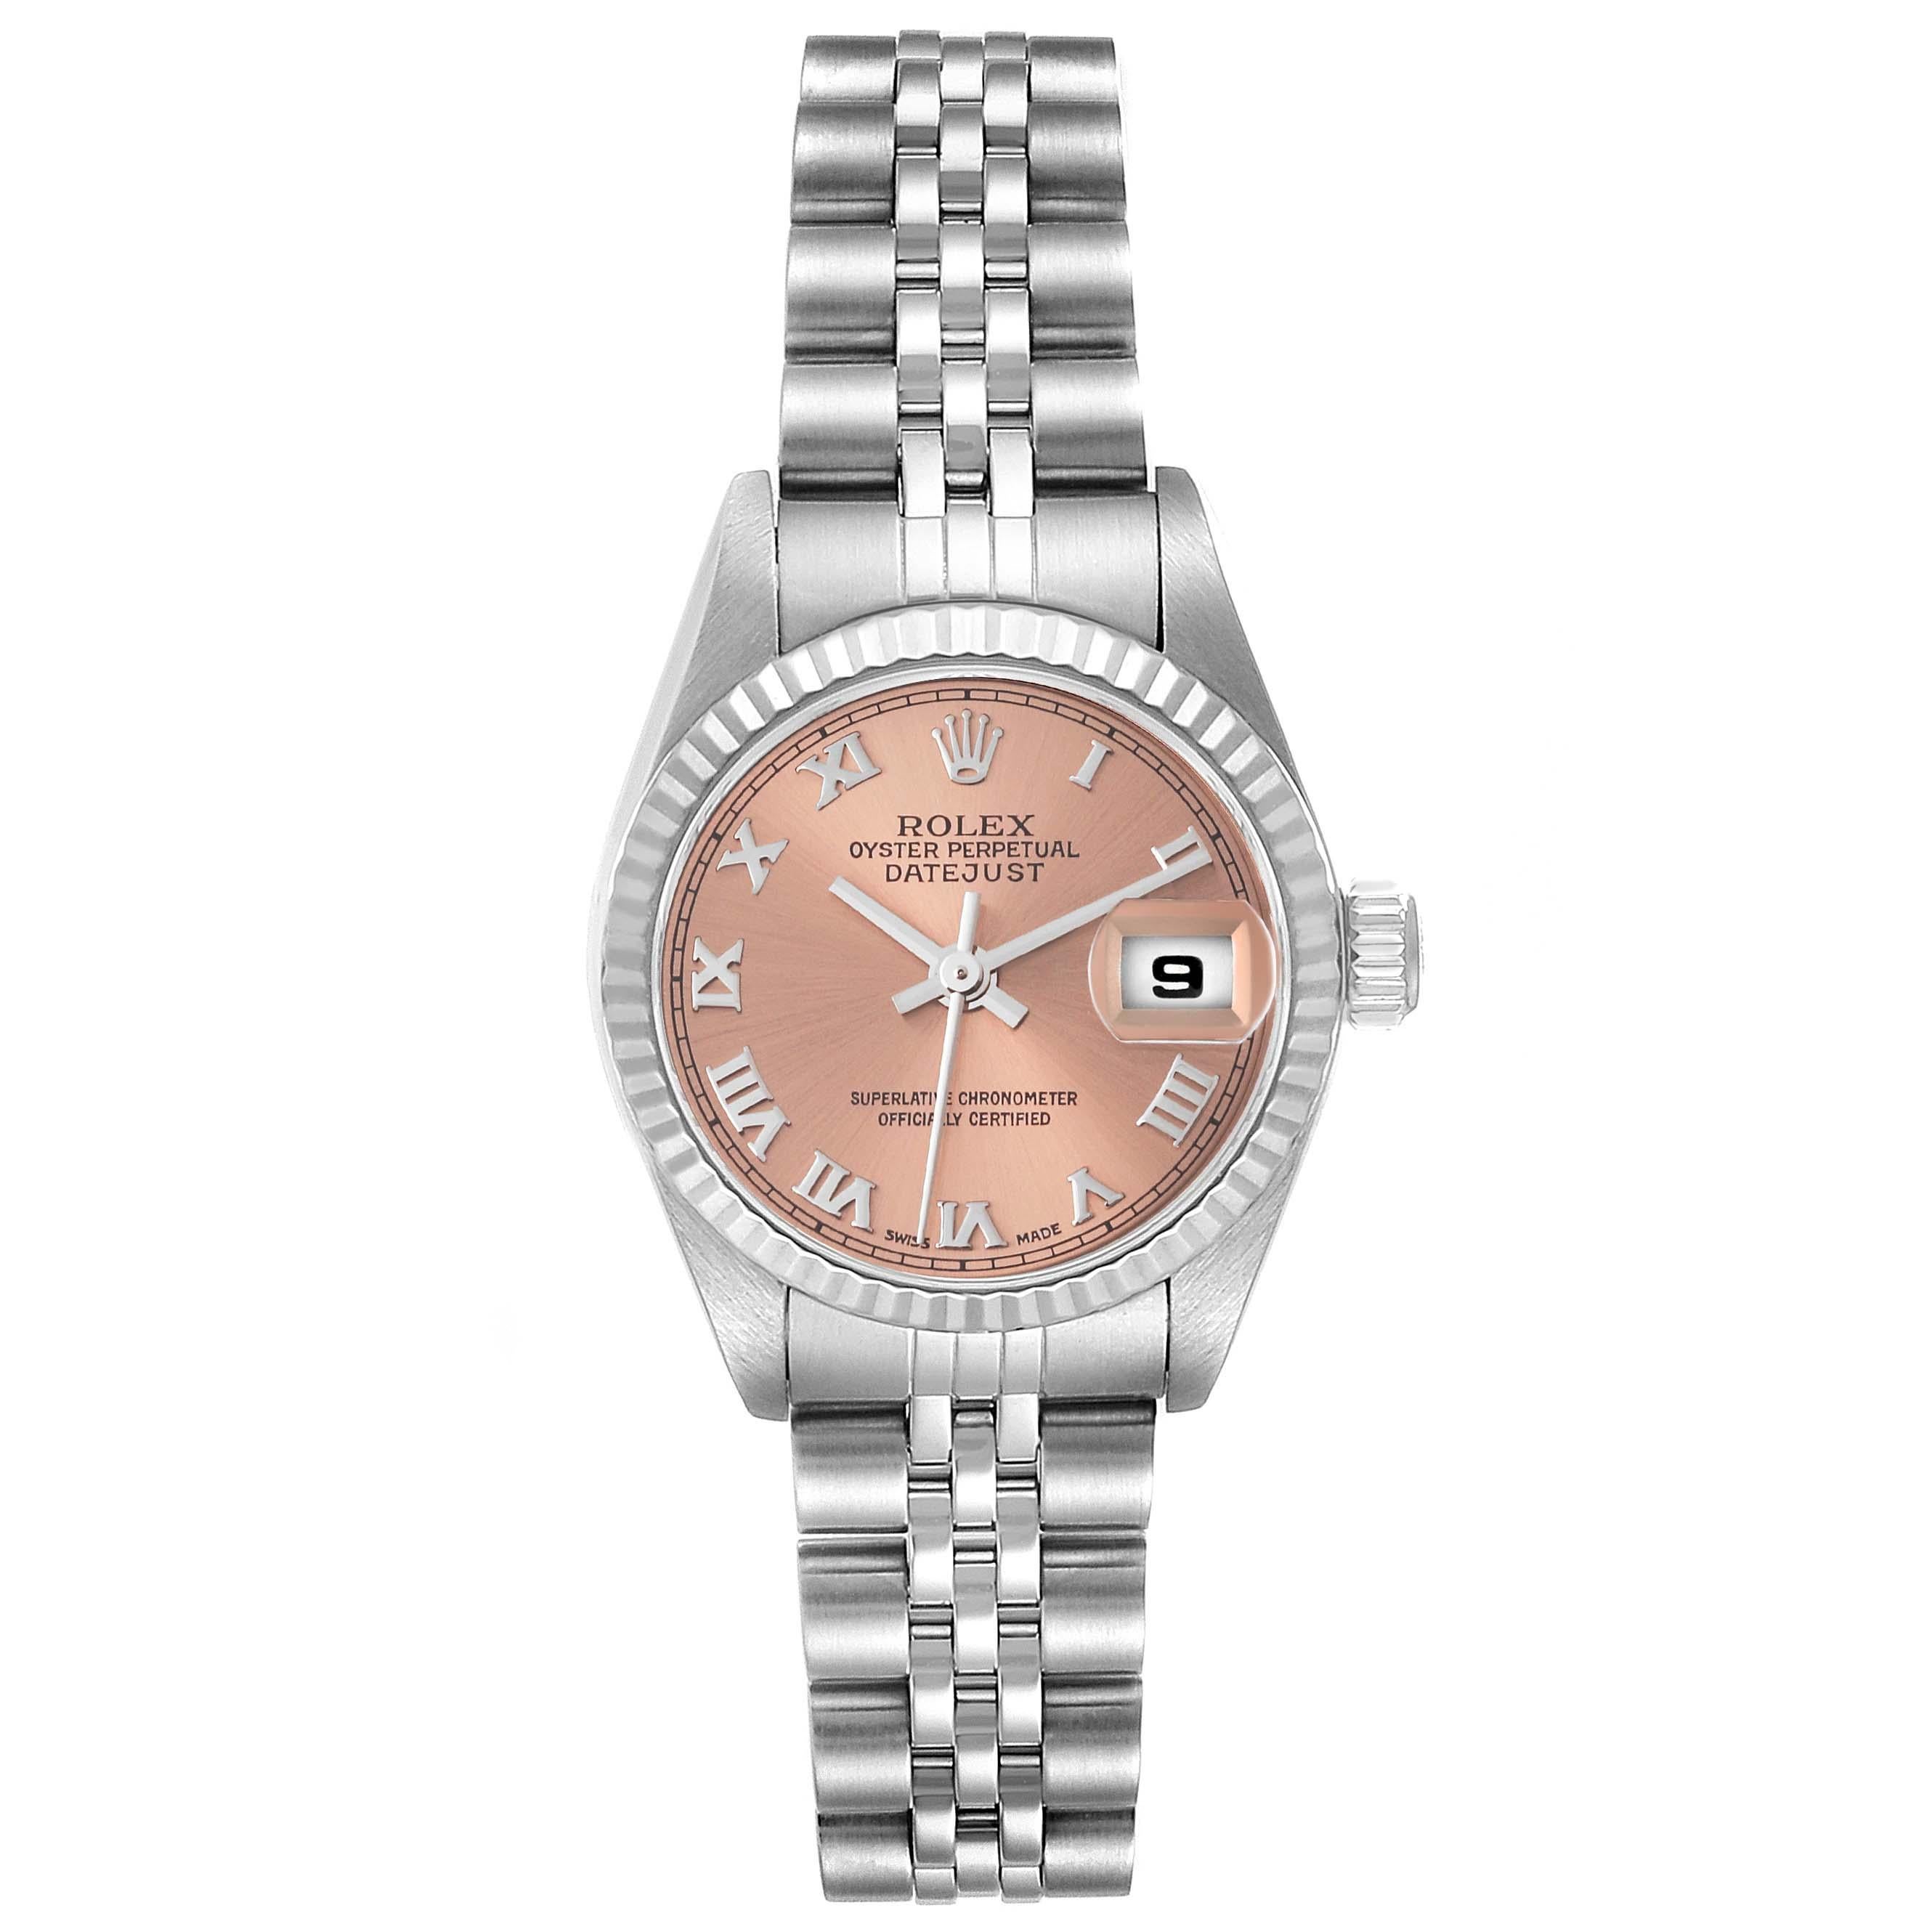 Rolex Datejust White Gold Salmon Dial Steel Ladies Watch 79174. Officially certified chronometer automatic self-winding movement. Stainless steel oyster case 26.0 mm in diameter. Rolex logo on the crown. 18K white gold fluted bezel. Scratch